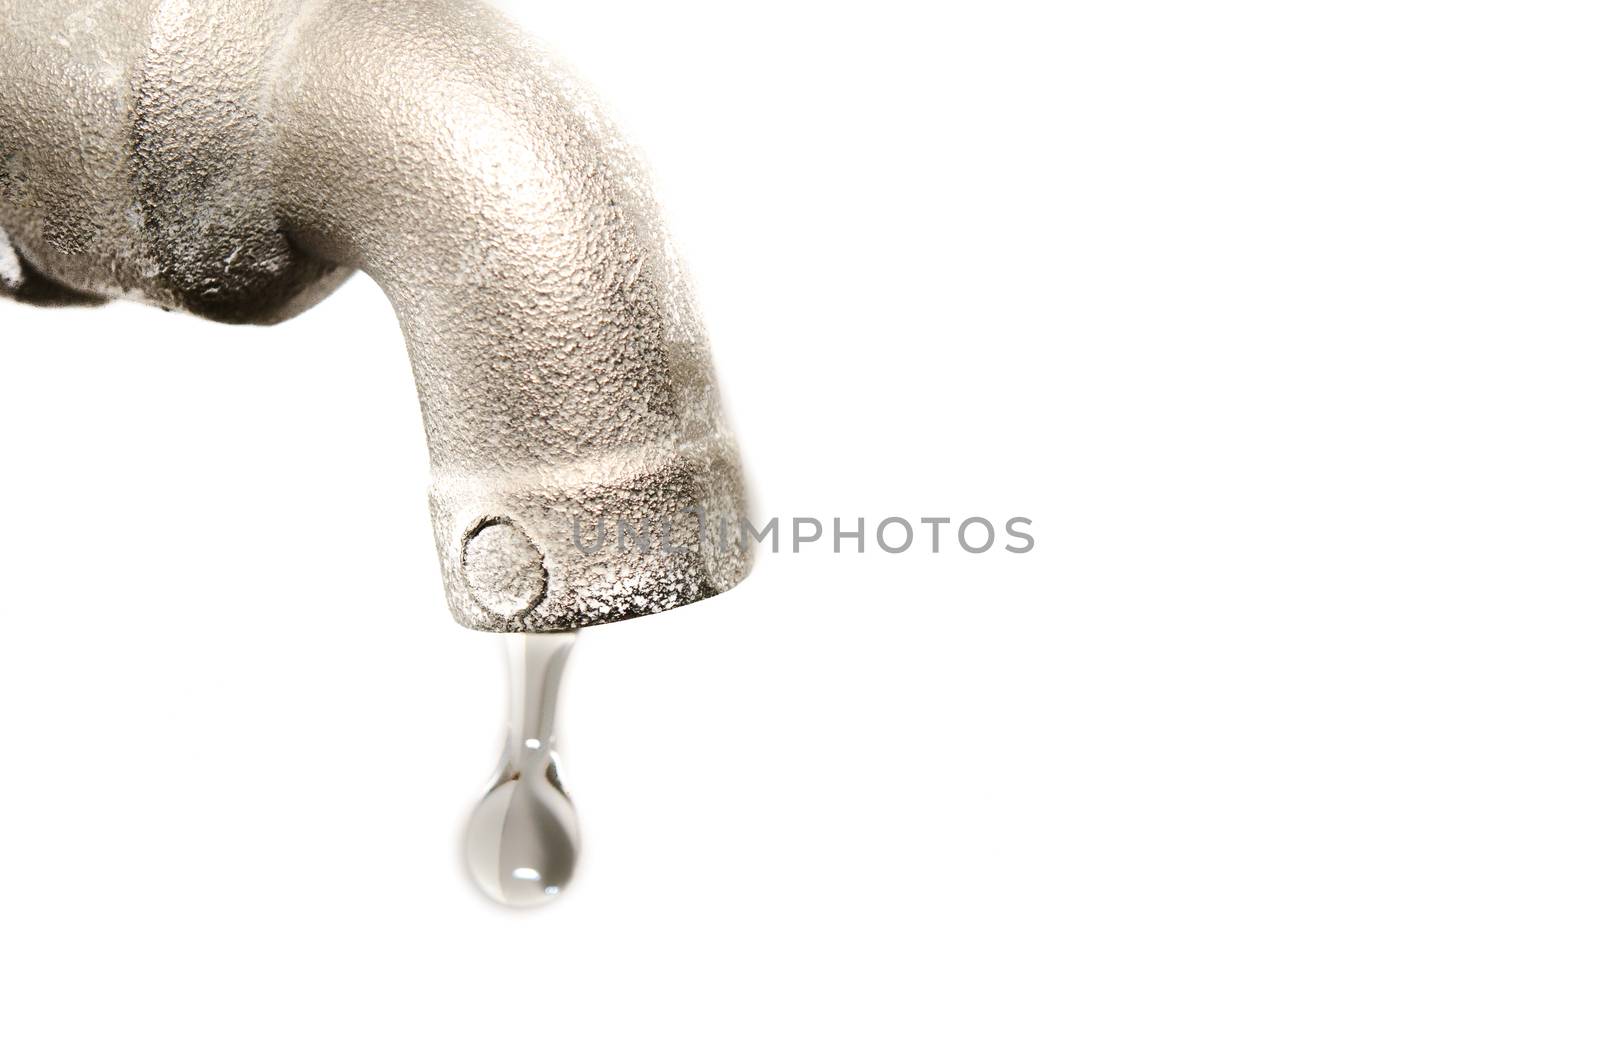 Dripping faucets by aoo3771